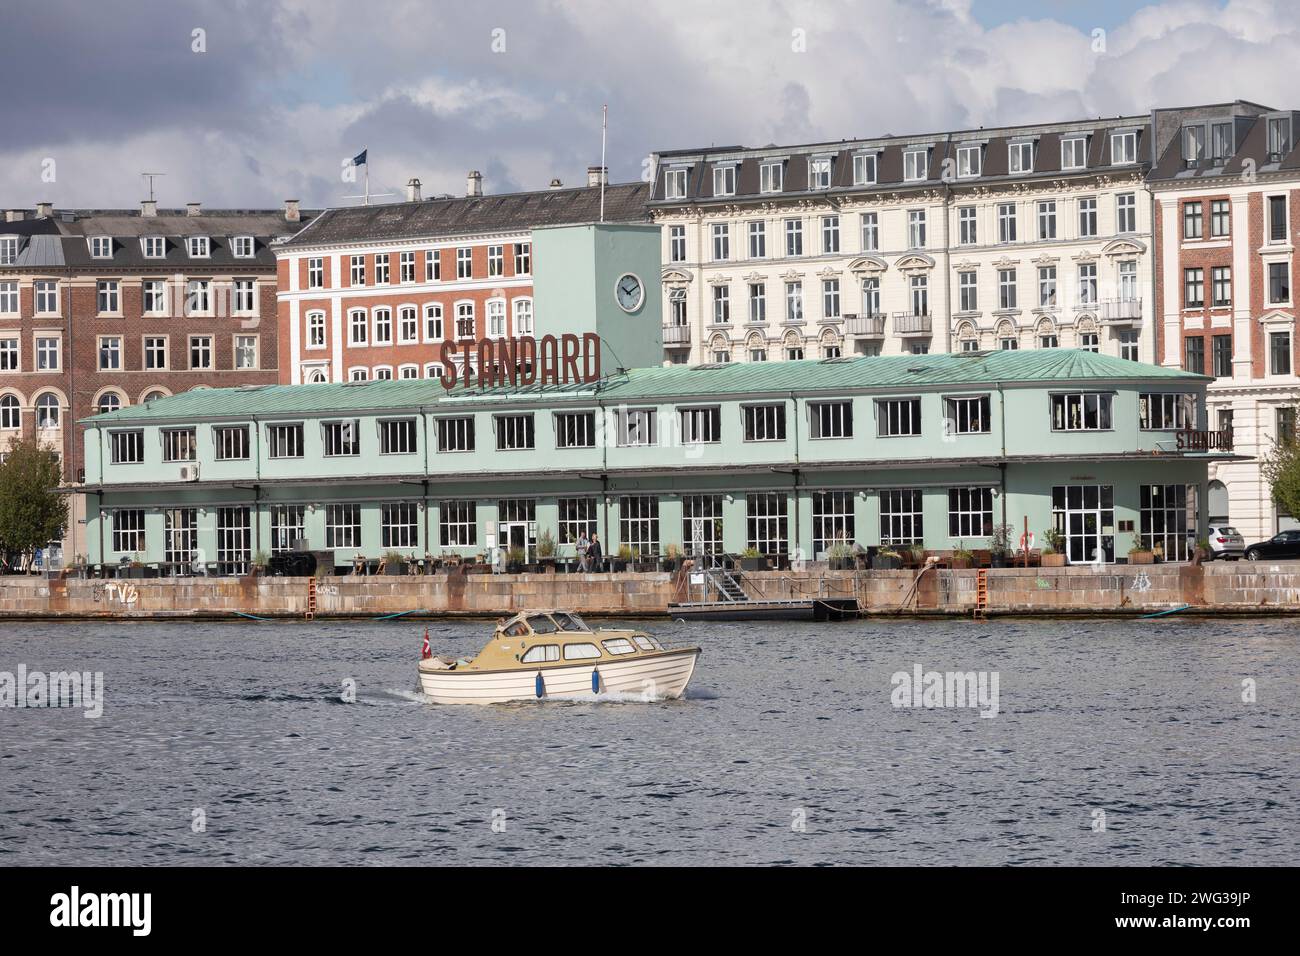 The Standard is a restaurant complex located on the Havnegade quay in central Copenhagen, Denmark. Stock Photo